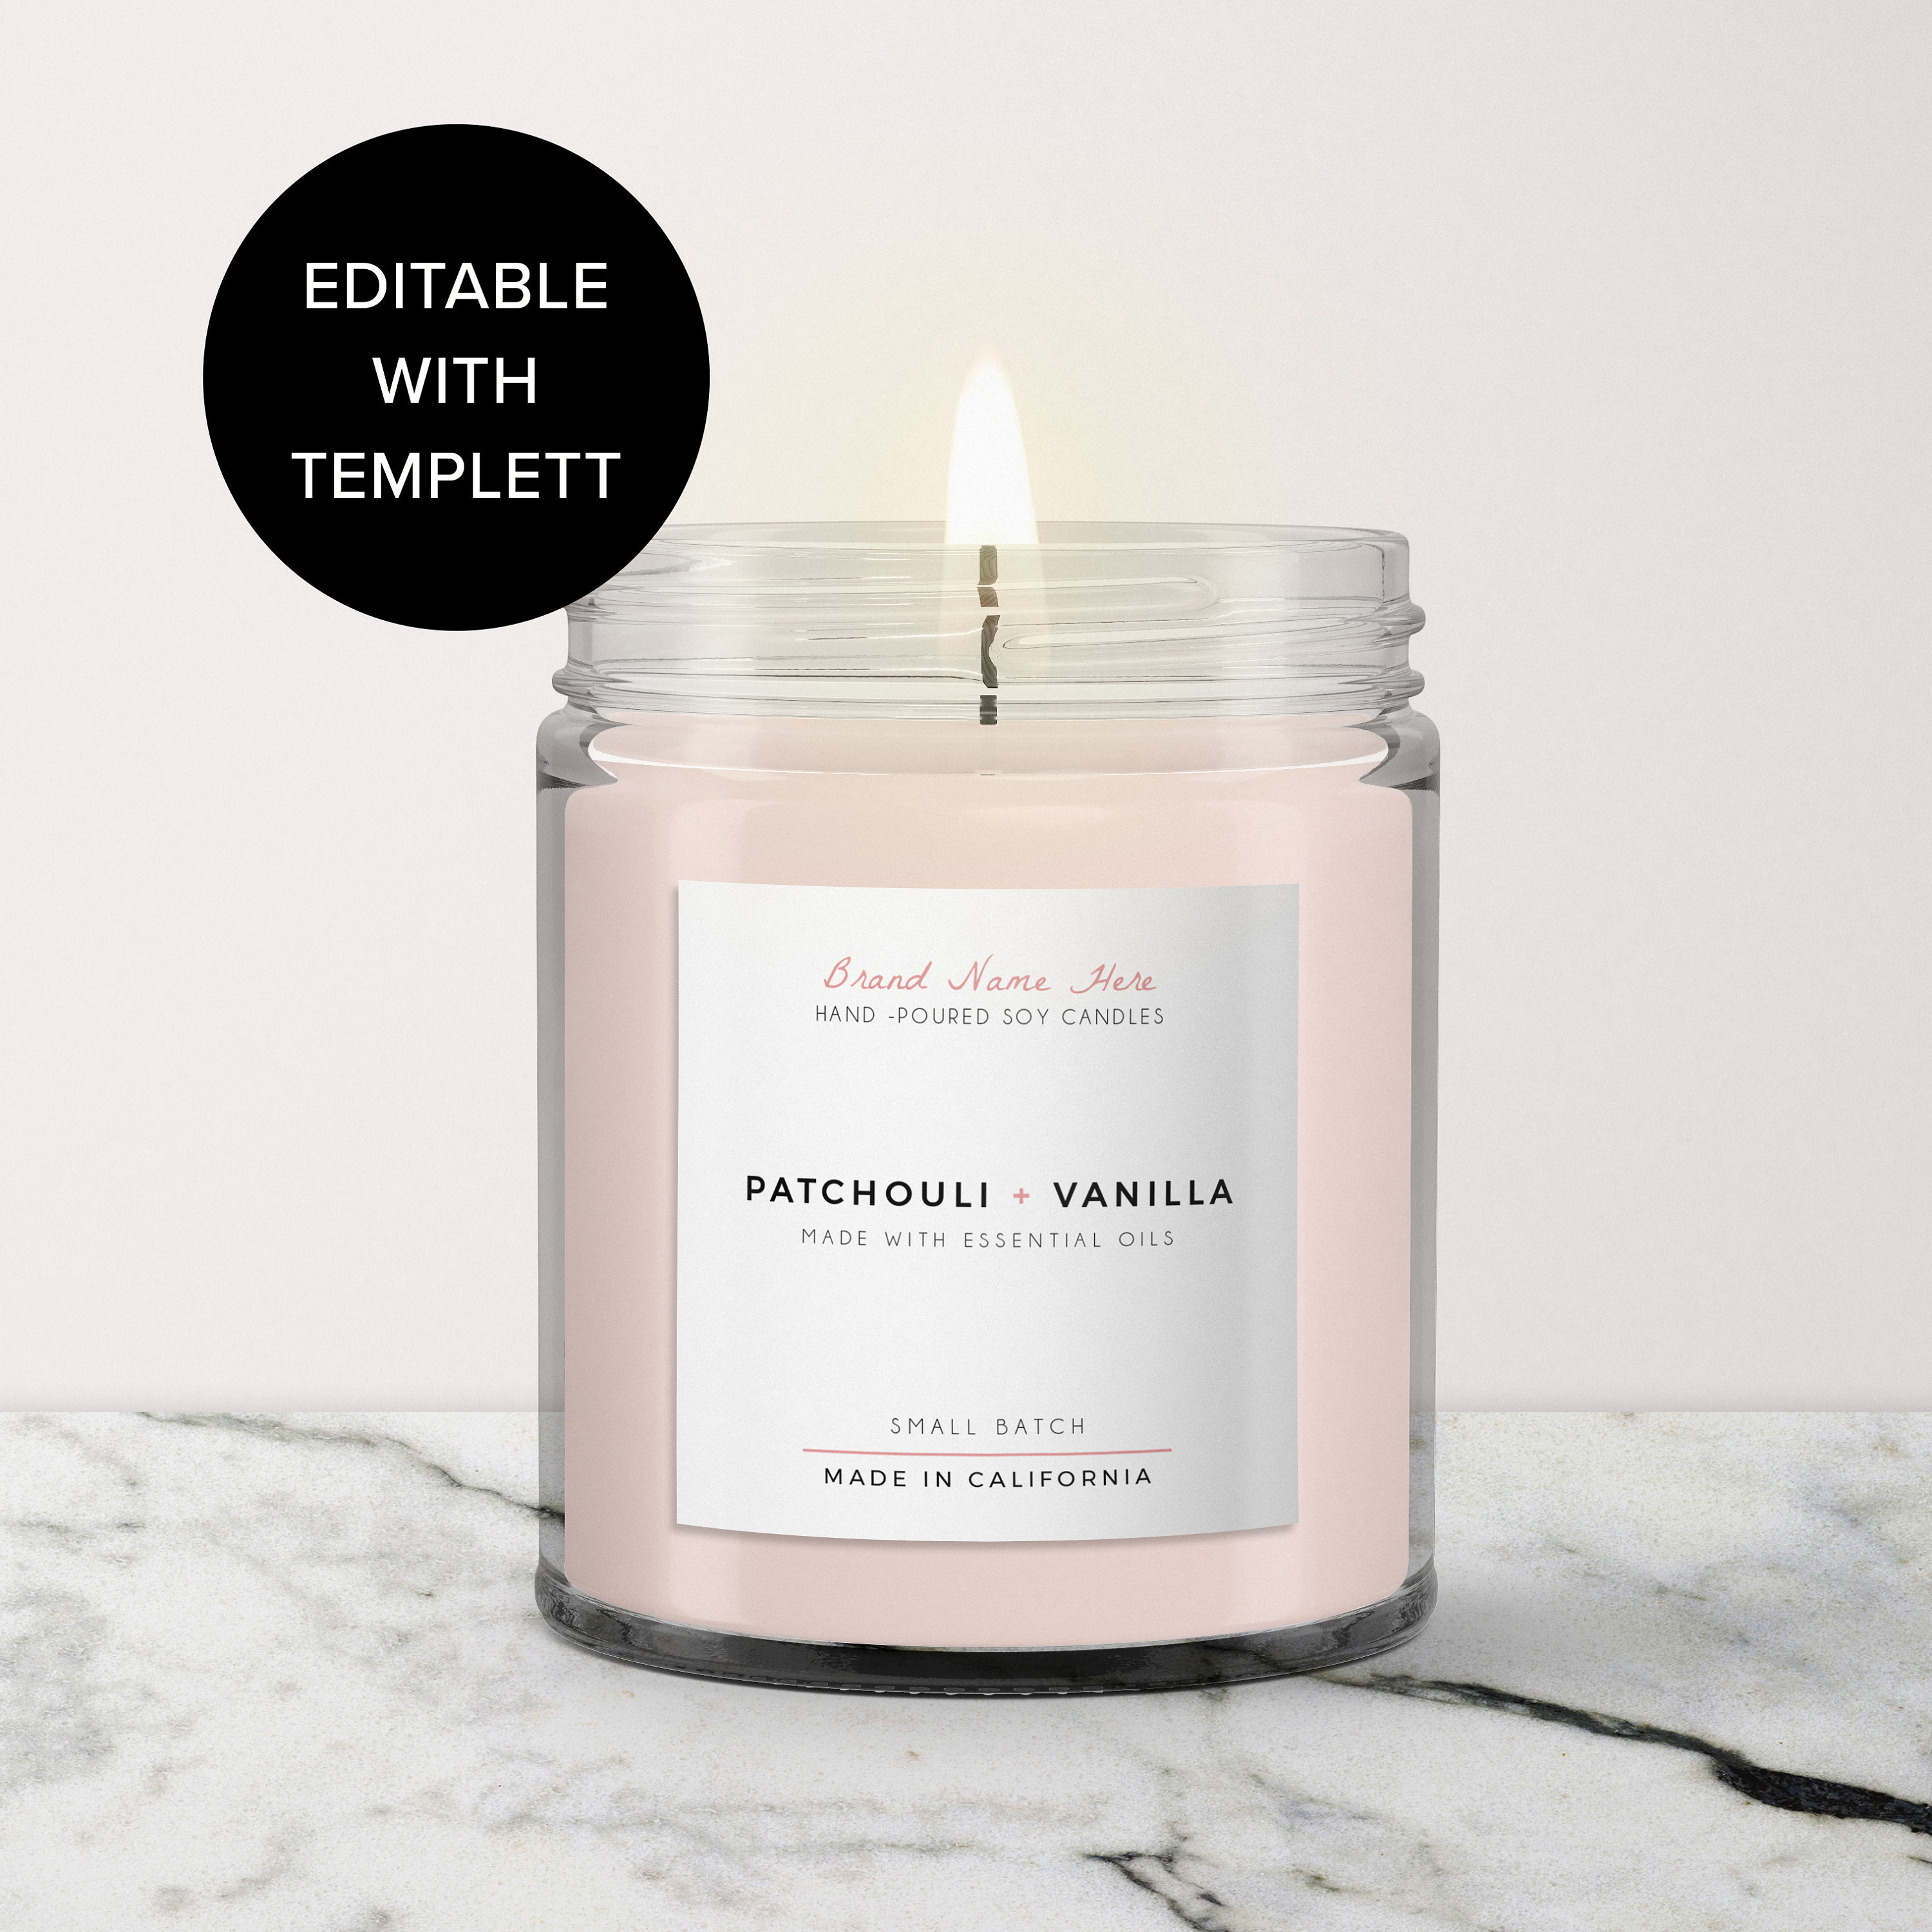 Top 3 Benefits to Using a Minimalist Design in Your Candle Labels